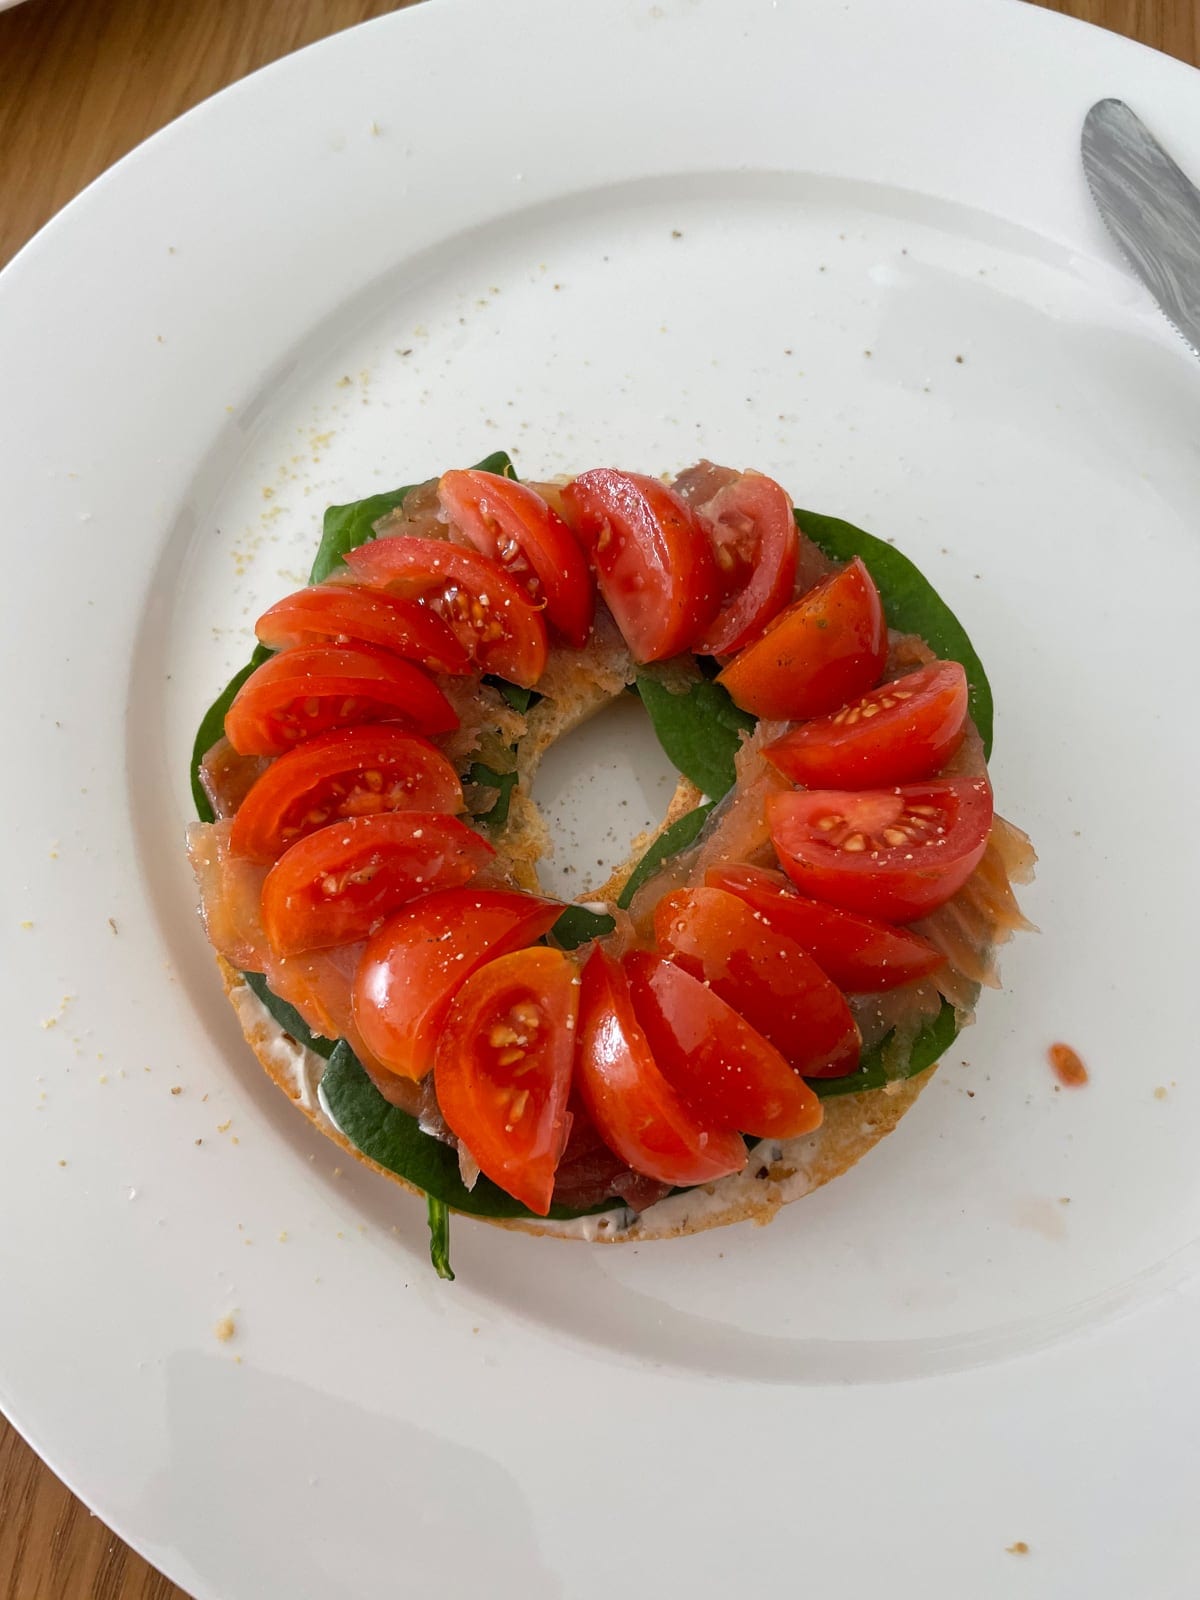 An open bagel served on a white plate, topped with baby spinach leaves, and wedges of cherry tomato arraigned on top neatly like a wheel